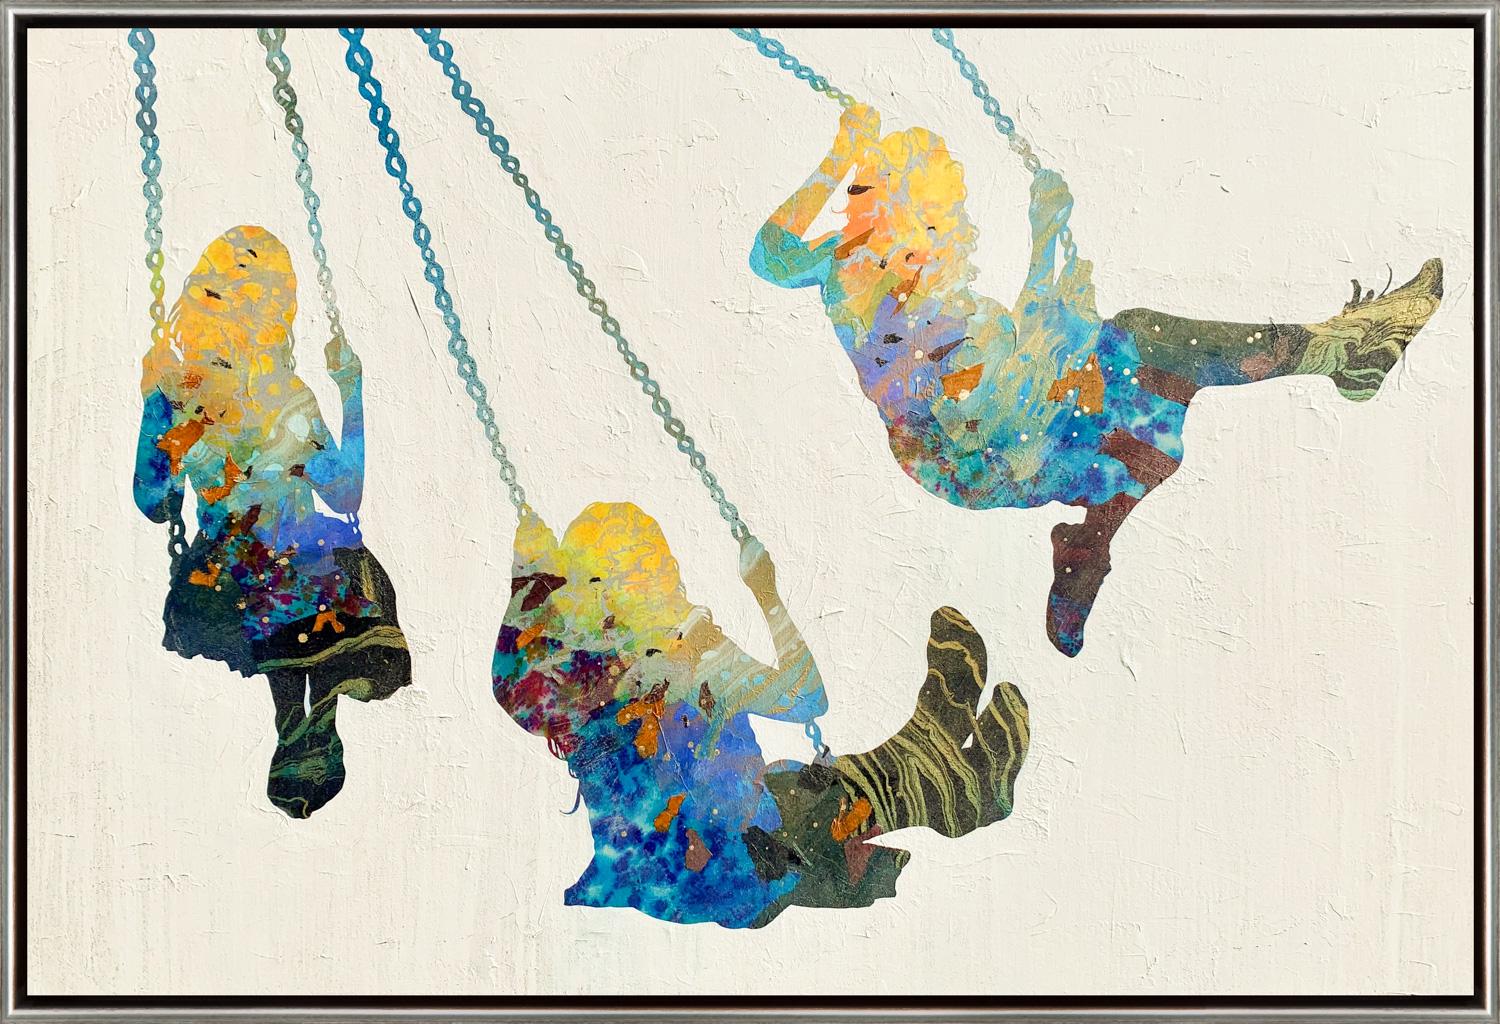 Christopher Peter Figurative Painting - "Three Swings" Contemporary Silhouettes Mixed Media on Canvas with Frame